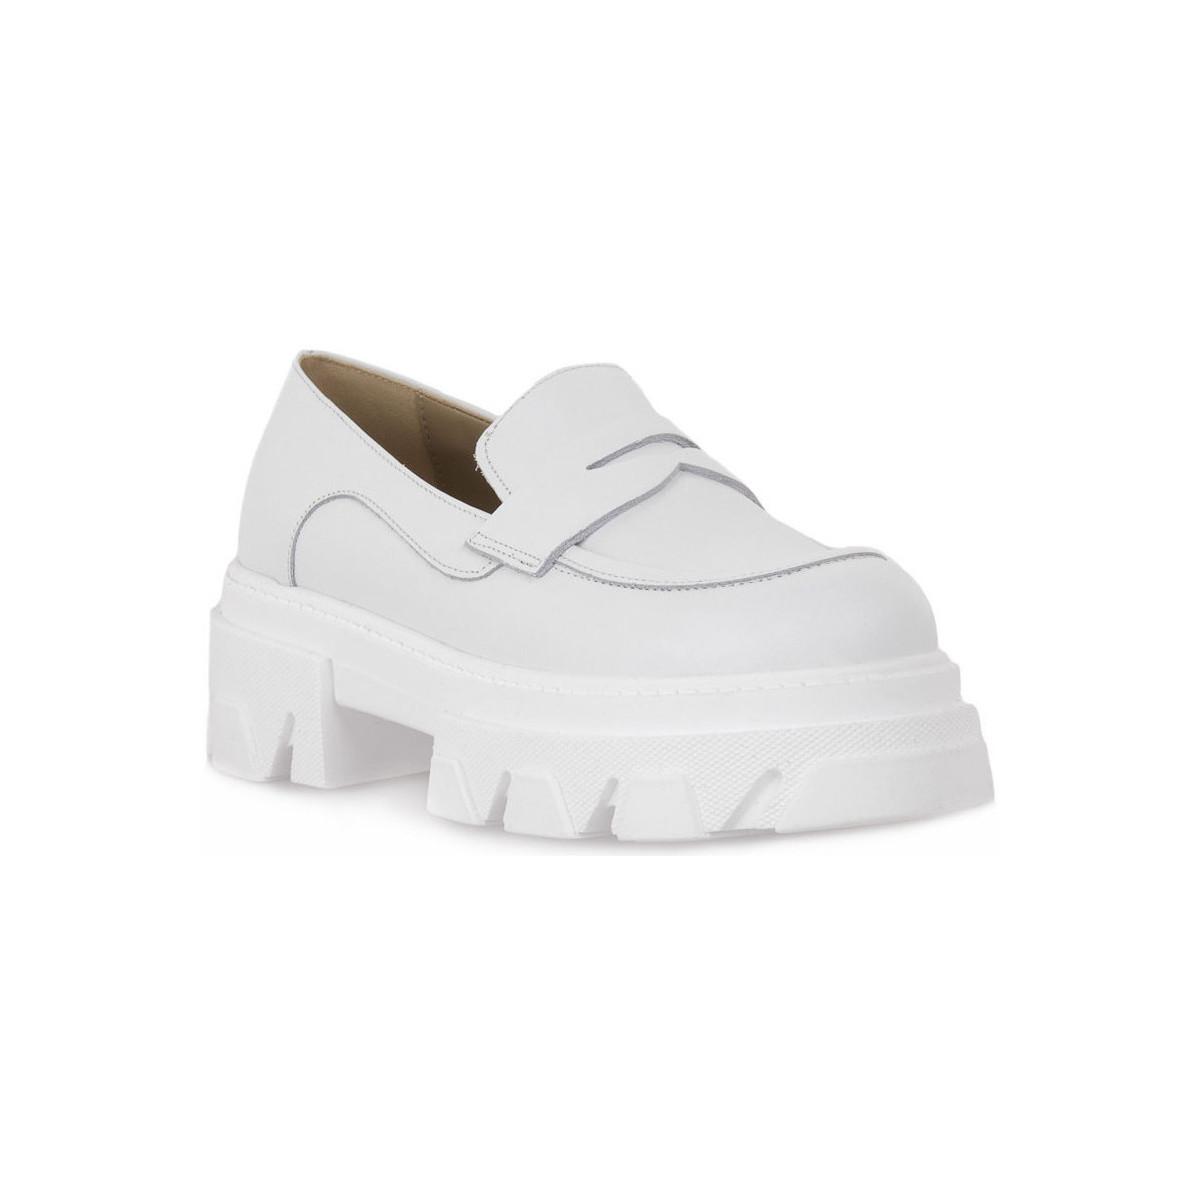 Chaussures Femme Cyclon-21 low-top sneakers Weiß VITELLO BIANCO Blanc